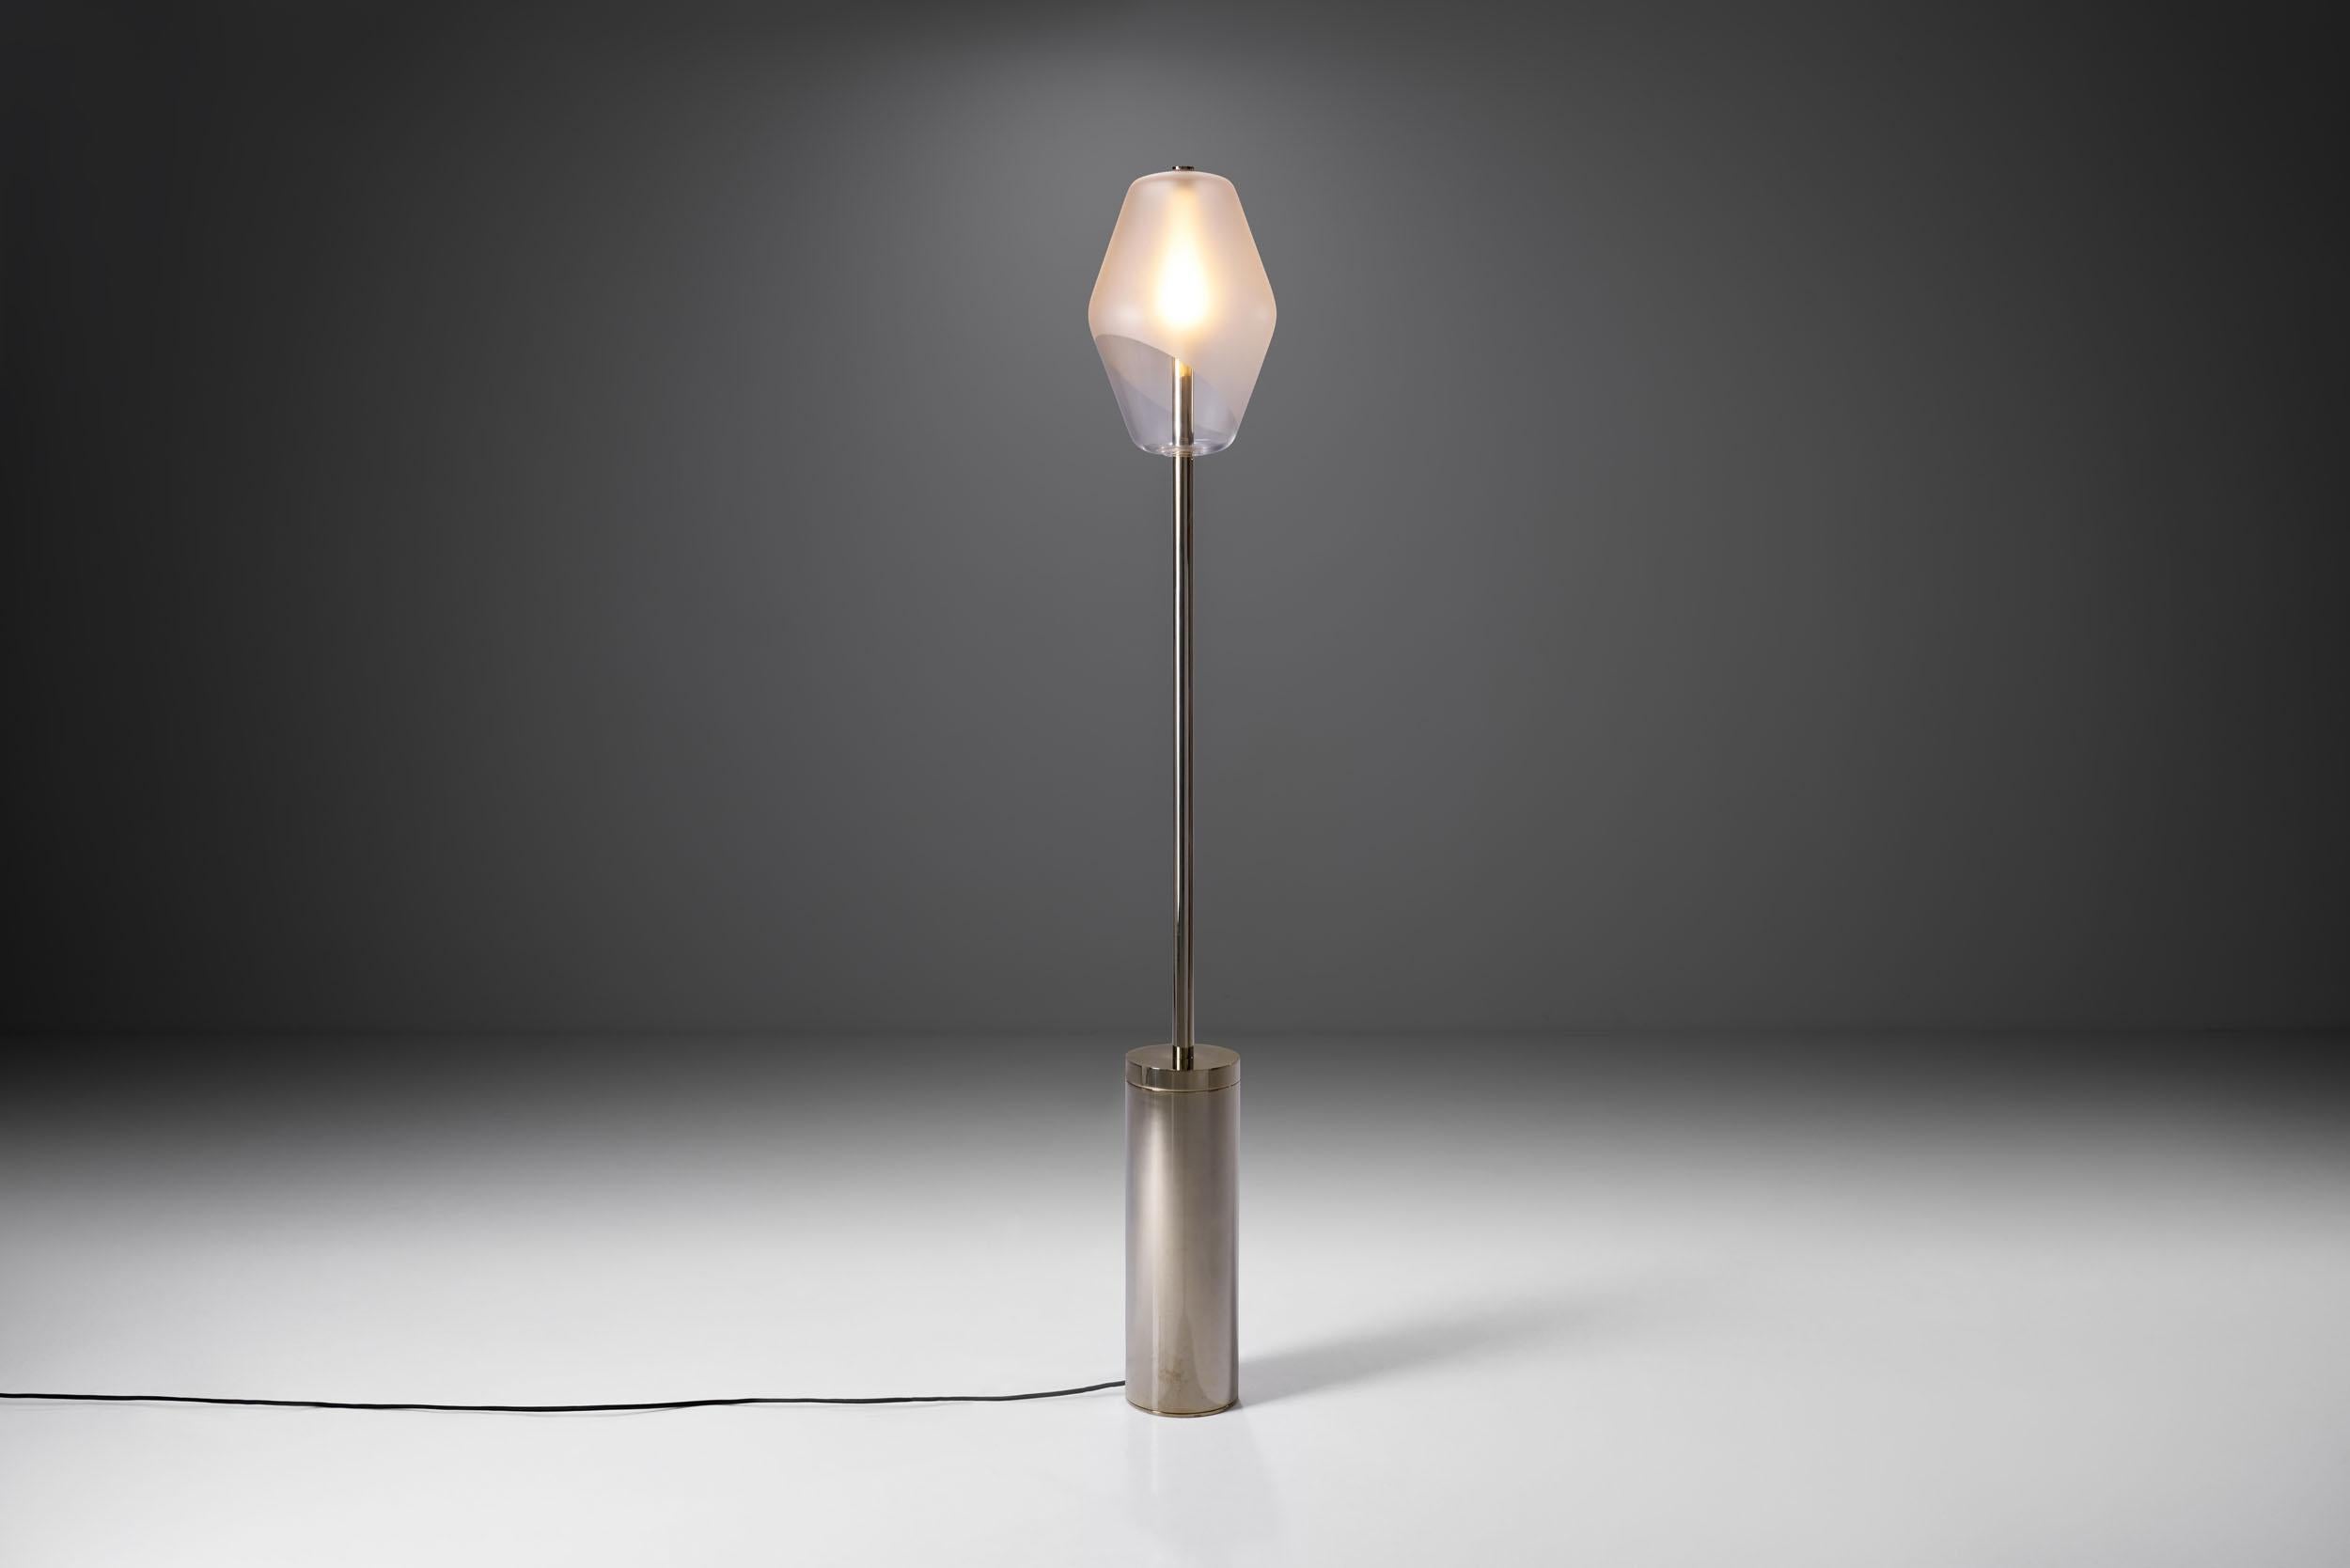 Inspired by the Parisian street lights, Régis Botta designed this floor lamp to create ambient, warm light. This floor lamp is the most striking of the “Parisienne” collection, both in terms of size and design.

Favouring pure, evident lines this